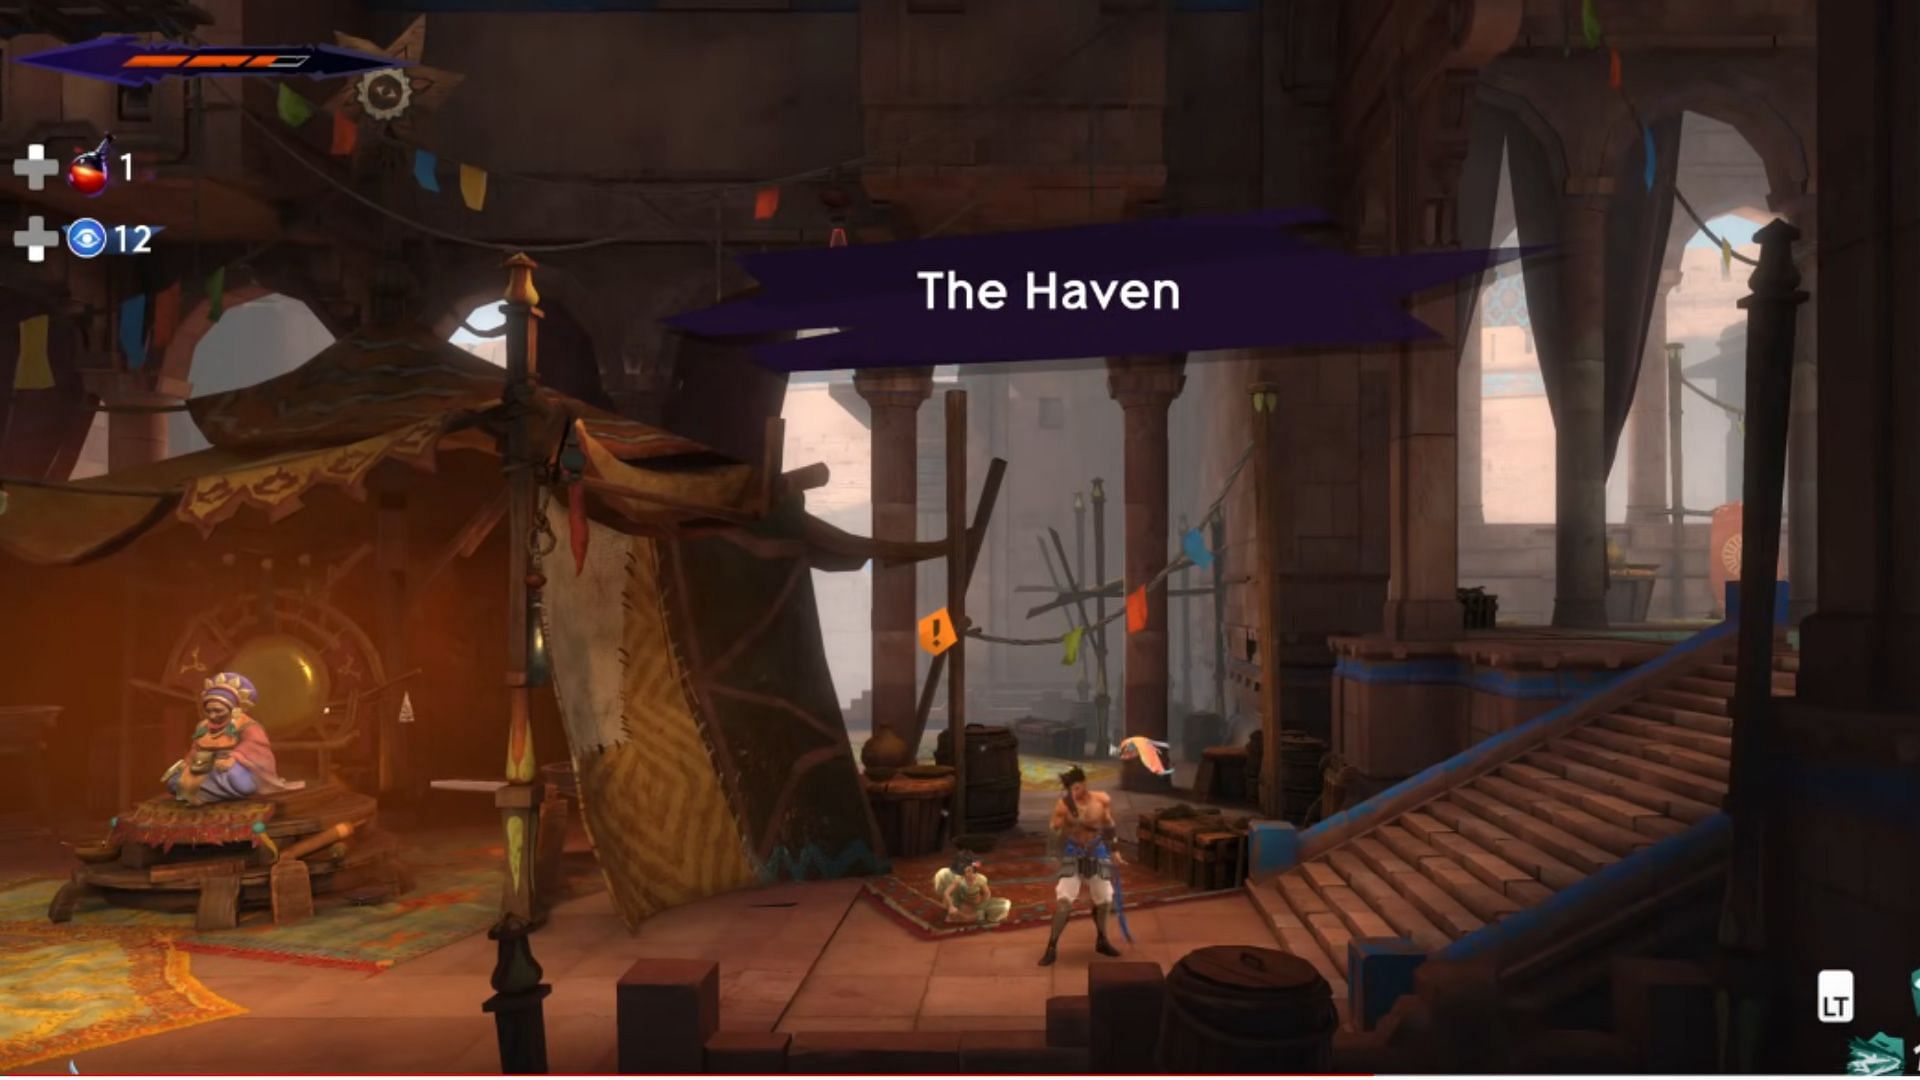 Make your way to the Haven located at Mount Qaf (Image via Ubisoft)